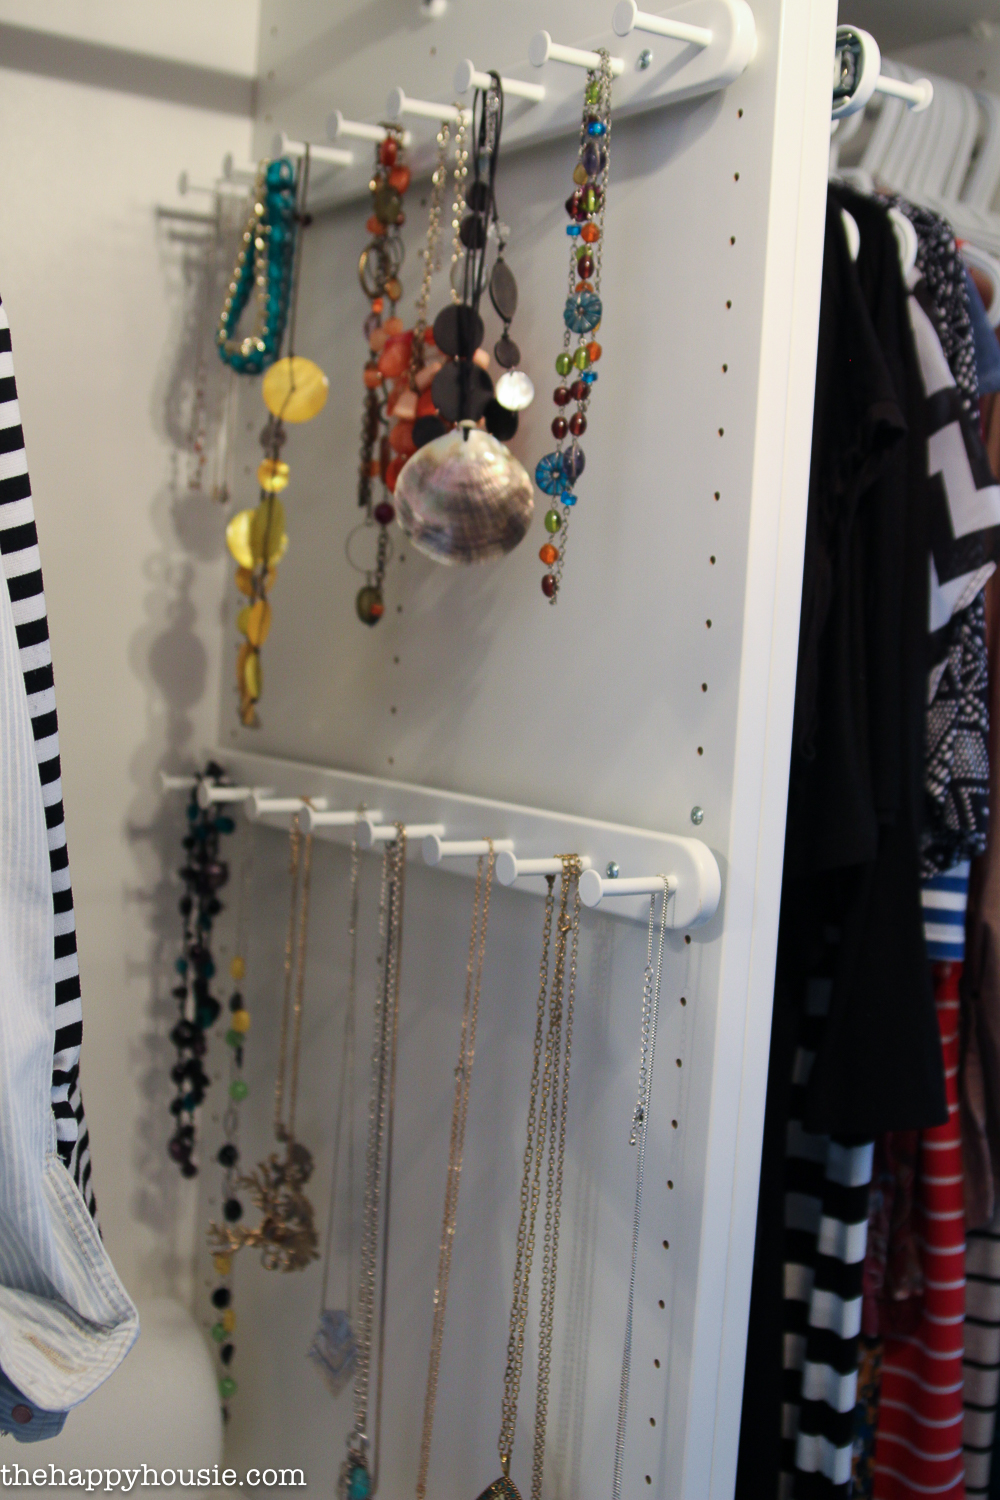 Jewellery hanging from pegs in the closet.